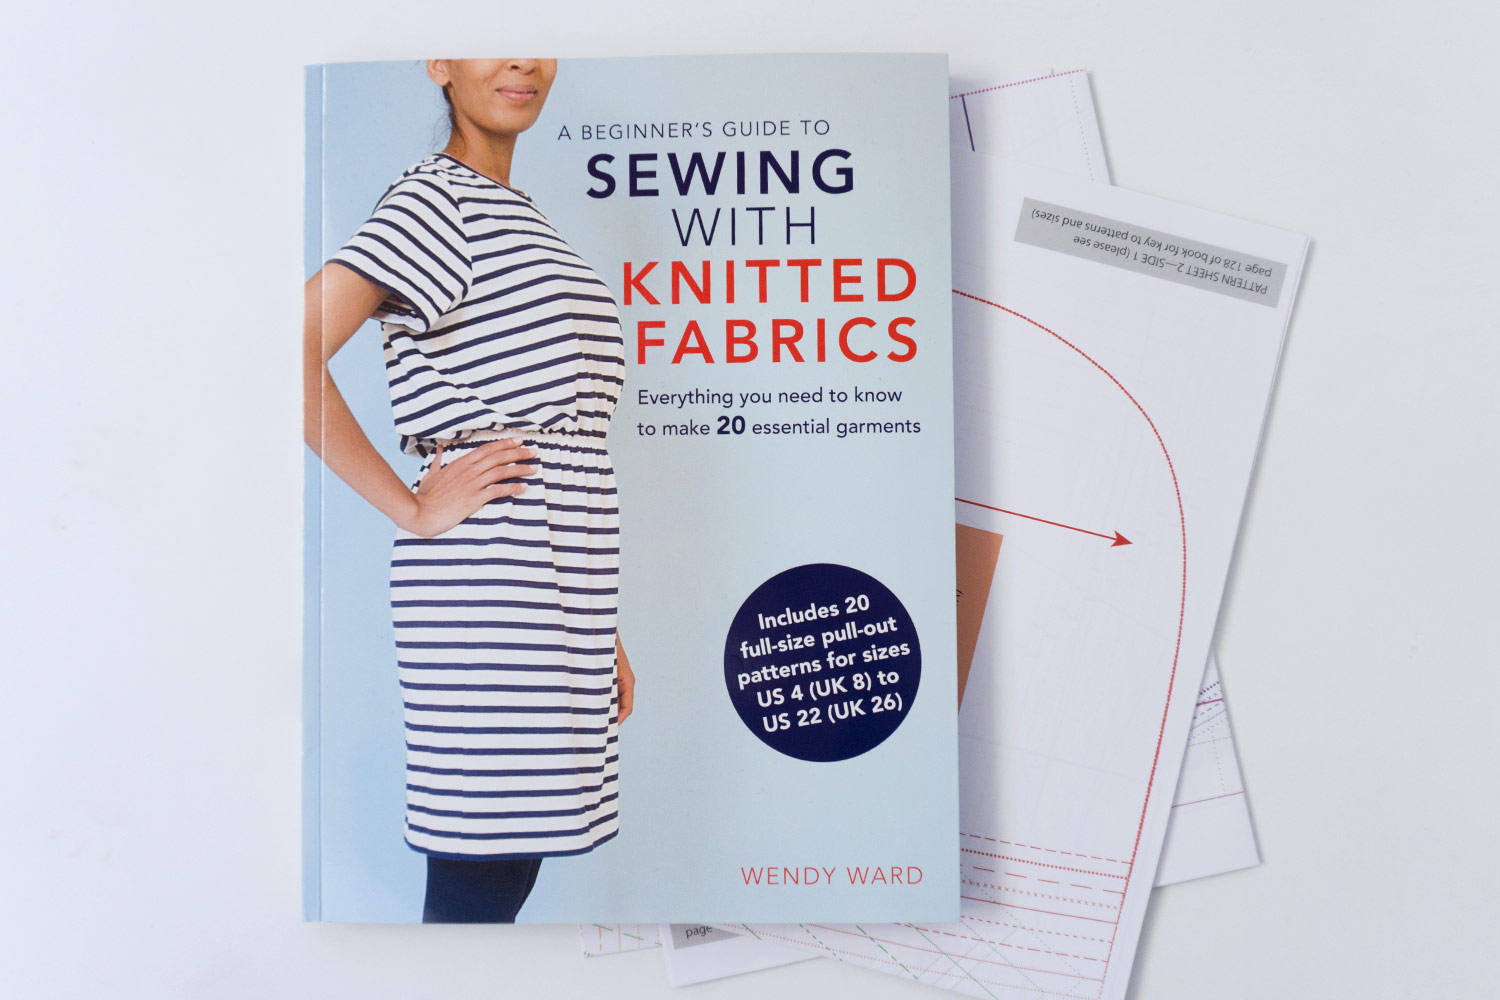 A Beginner's Guide to Knit Fabric